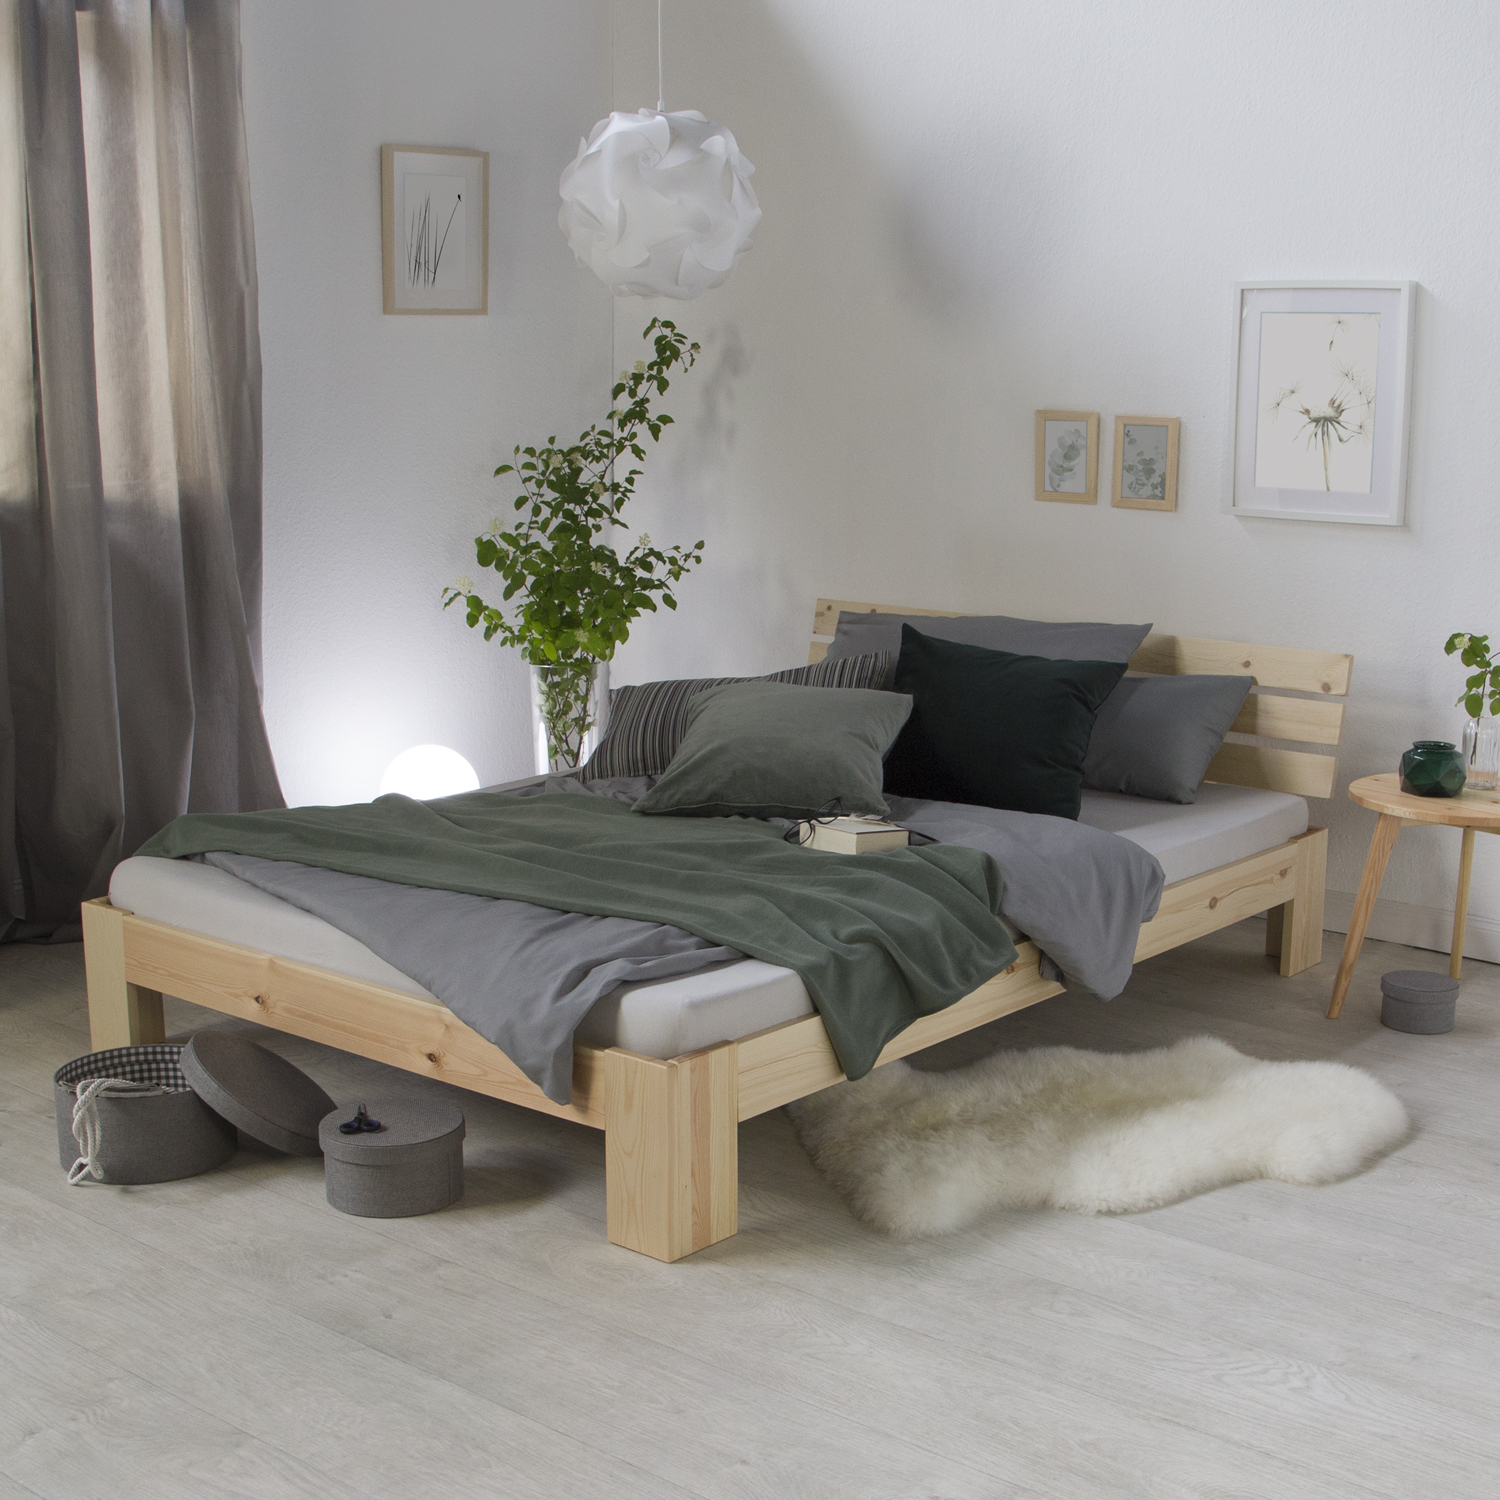 Double Bed Wooden Bed Futon Bed 120x200 cm Natural Pine Bed Frame Solid Wood